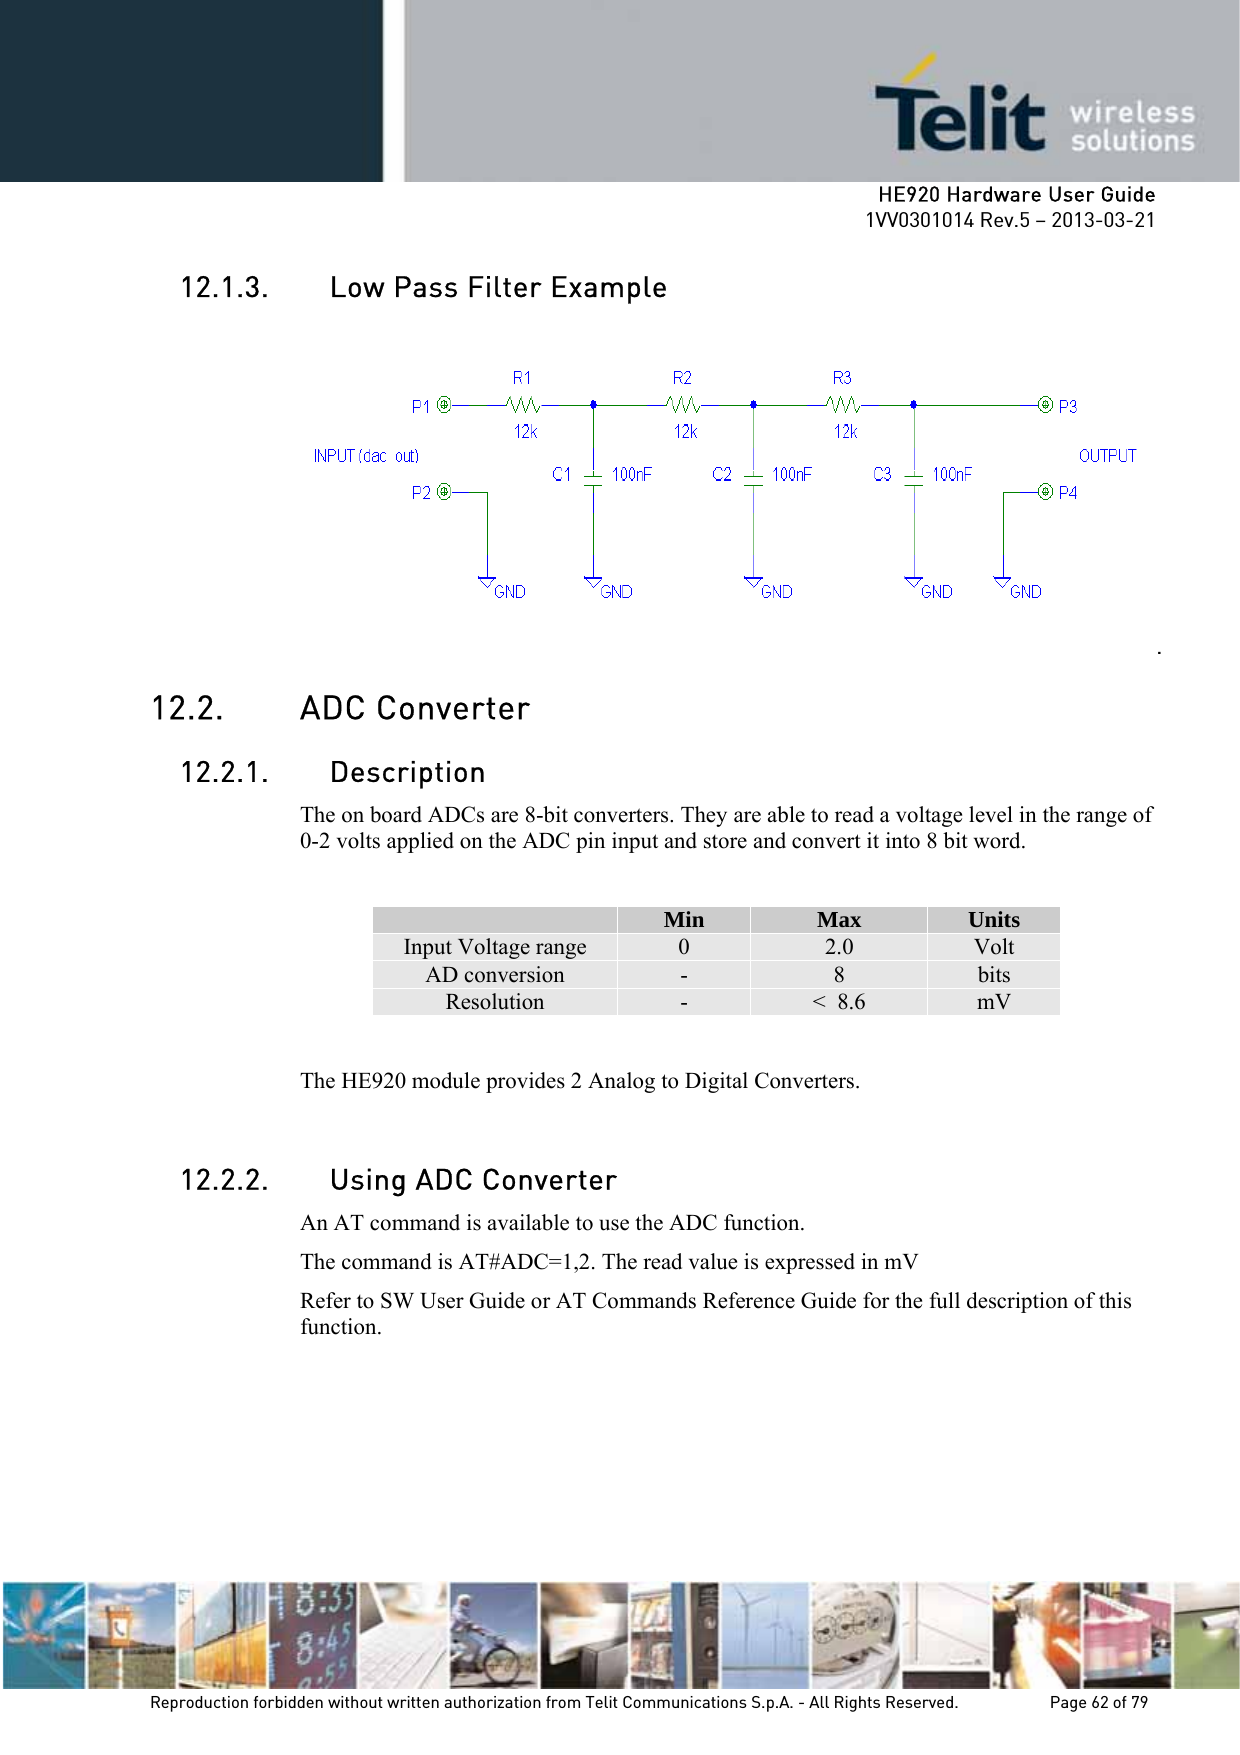     HE920 Hardware User Guide 1VV0301014 Rev.5 – 2013-03-21 Reproduction forbidden without written authorization from Telit Communications S.p.A. - All Rights Reserved.    Page 62 of 79  12.1.3. Low Pass Filter Example .  12.2. ADC Converter 12.2.1. Description The on board ADCs are 8-bit converters. They are able to read a voltage level in the range of 0-2 volts applied on the ADC pin input and store and convert it into 8 bit word.   Min  Max  Units Input Voltage range  0  2.0  Volt AD conversion  -  8  bits Resolution  -  &lt;  8.6  mV  The HE920 module provides 2 Analog to Digital Converters.   12.2.2. Using ADC Converter An AT command is available to use the ADC function.  The command is AT#ADC=1,2. The read value is expressed in mV Refer to SW User Guide or AT Commands Reference Guide for the full description of this function.  